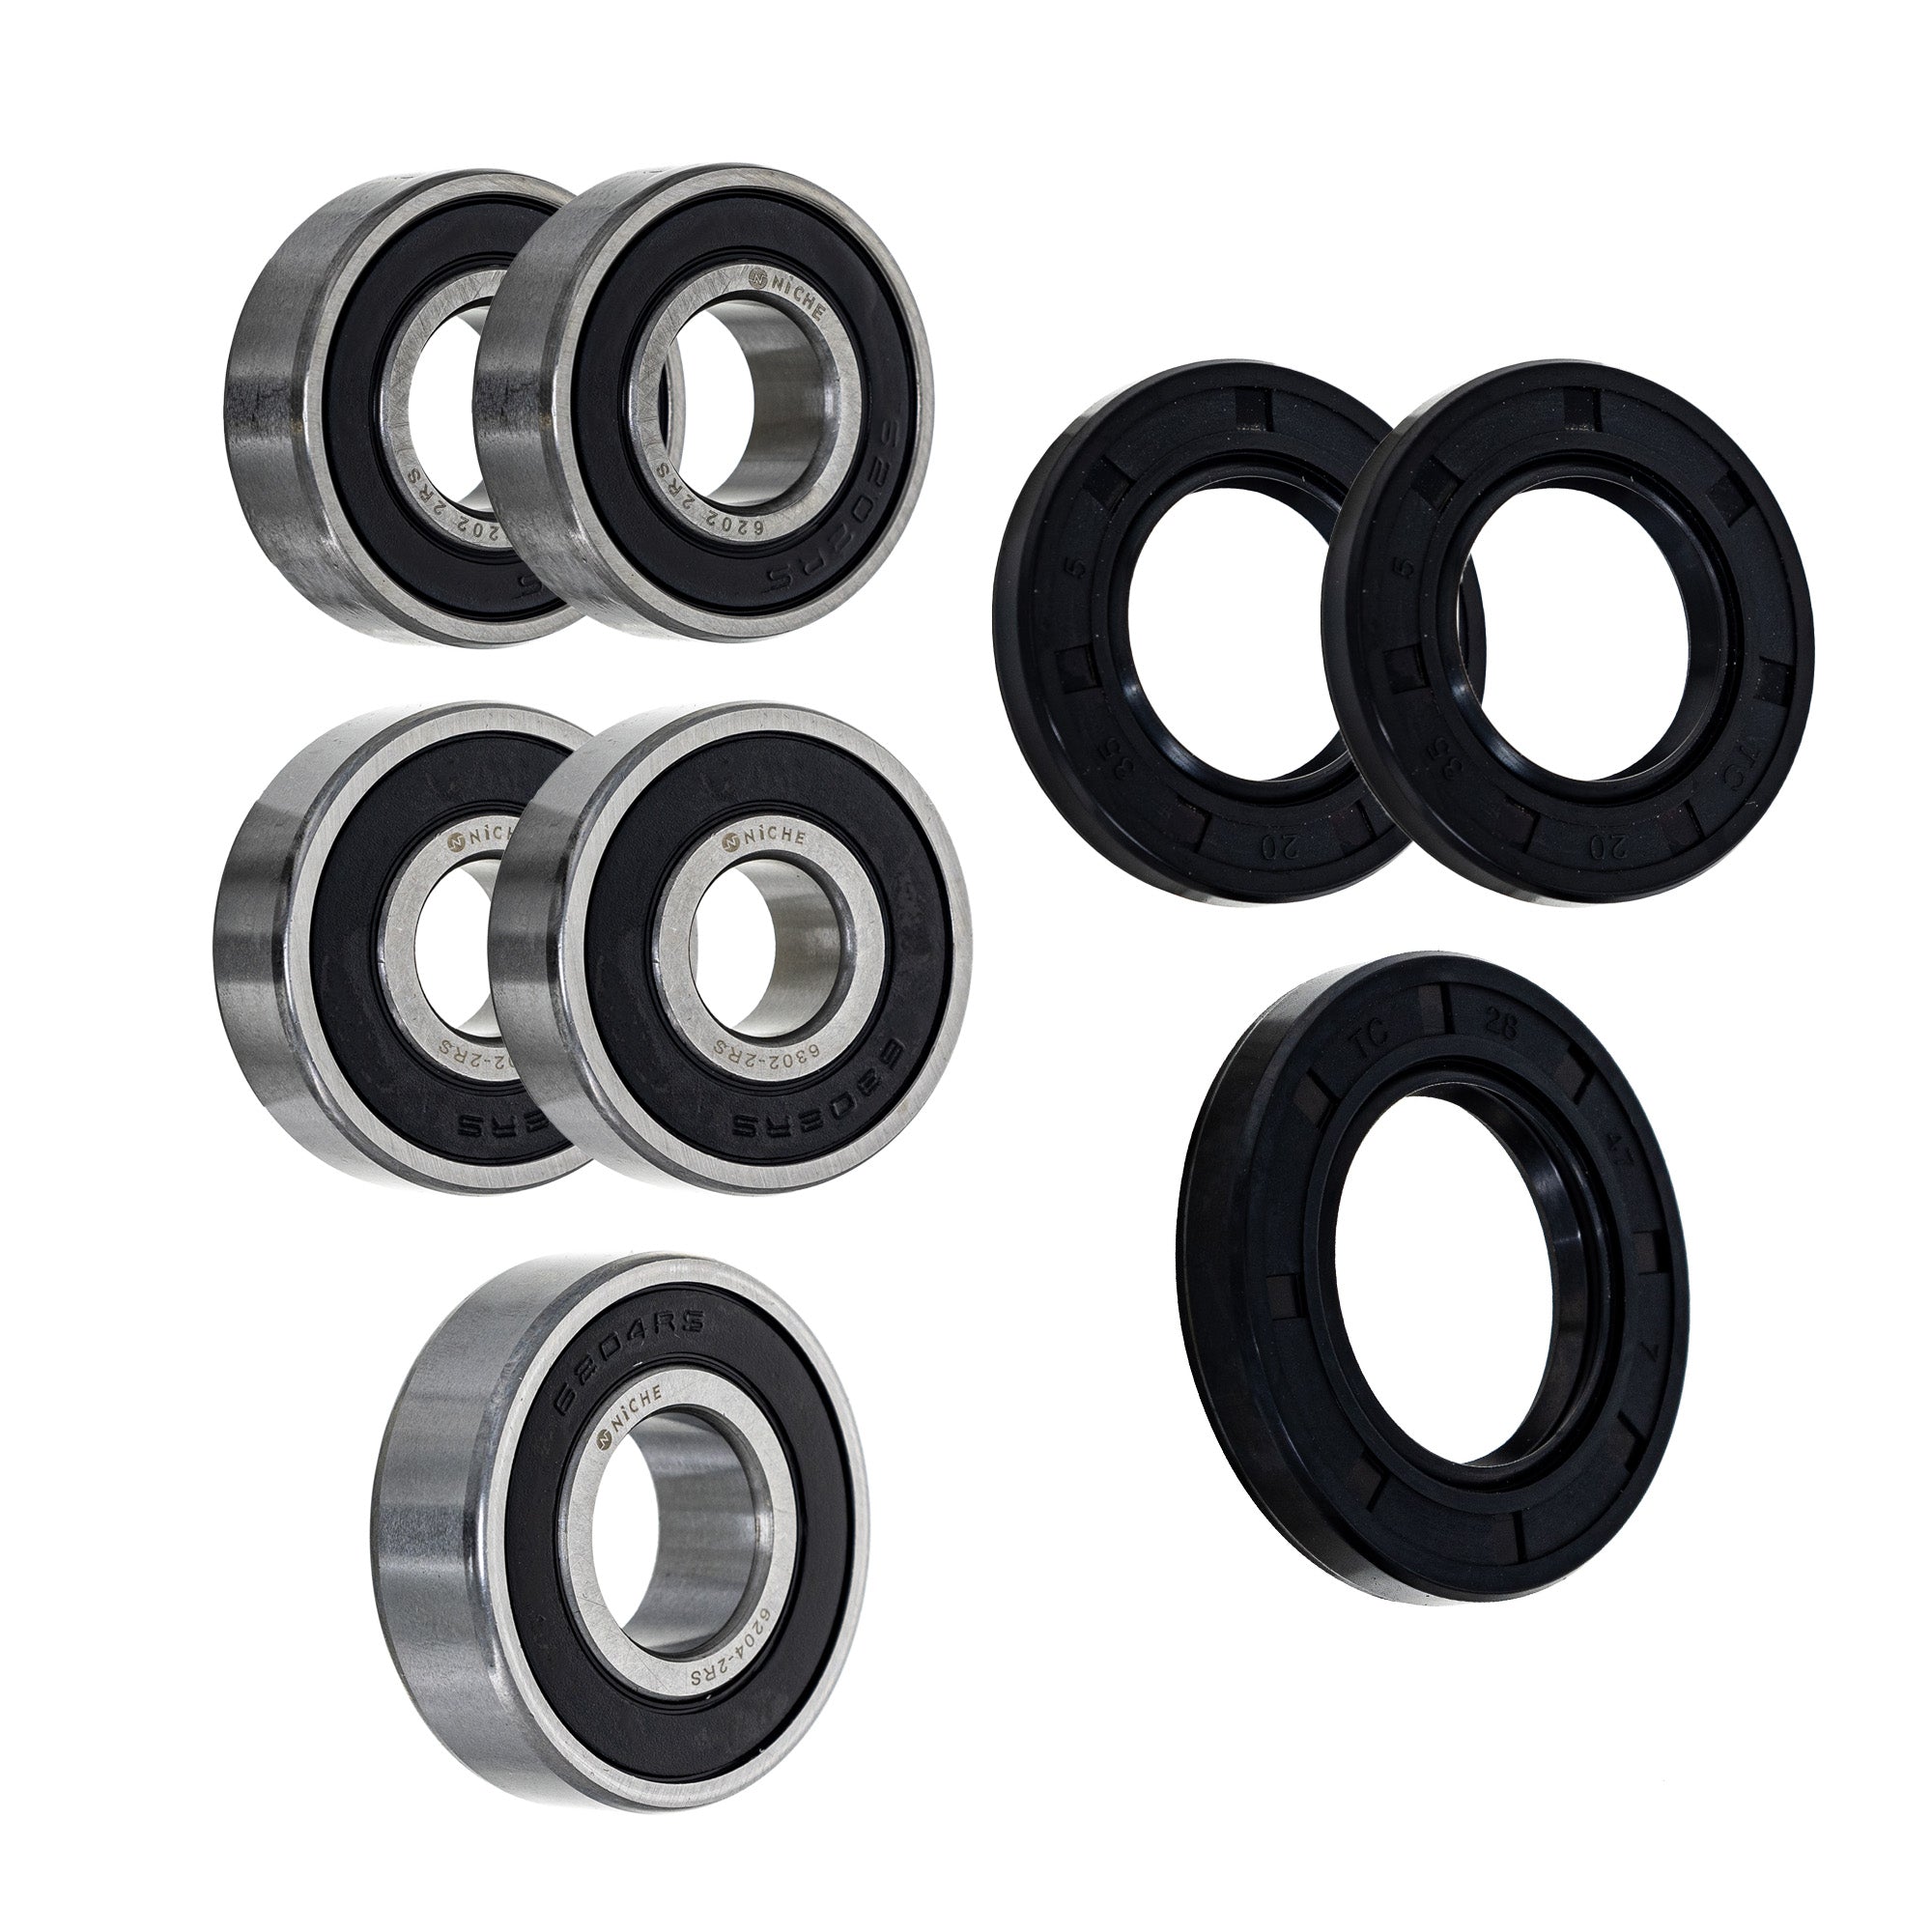 Wheel Bearing Seal Kit for zOTHER Ref No XT350 NICHE MK1008722